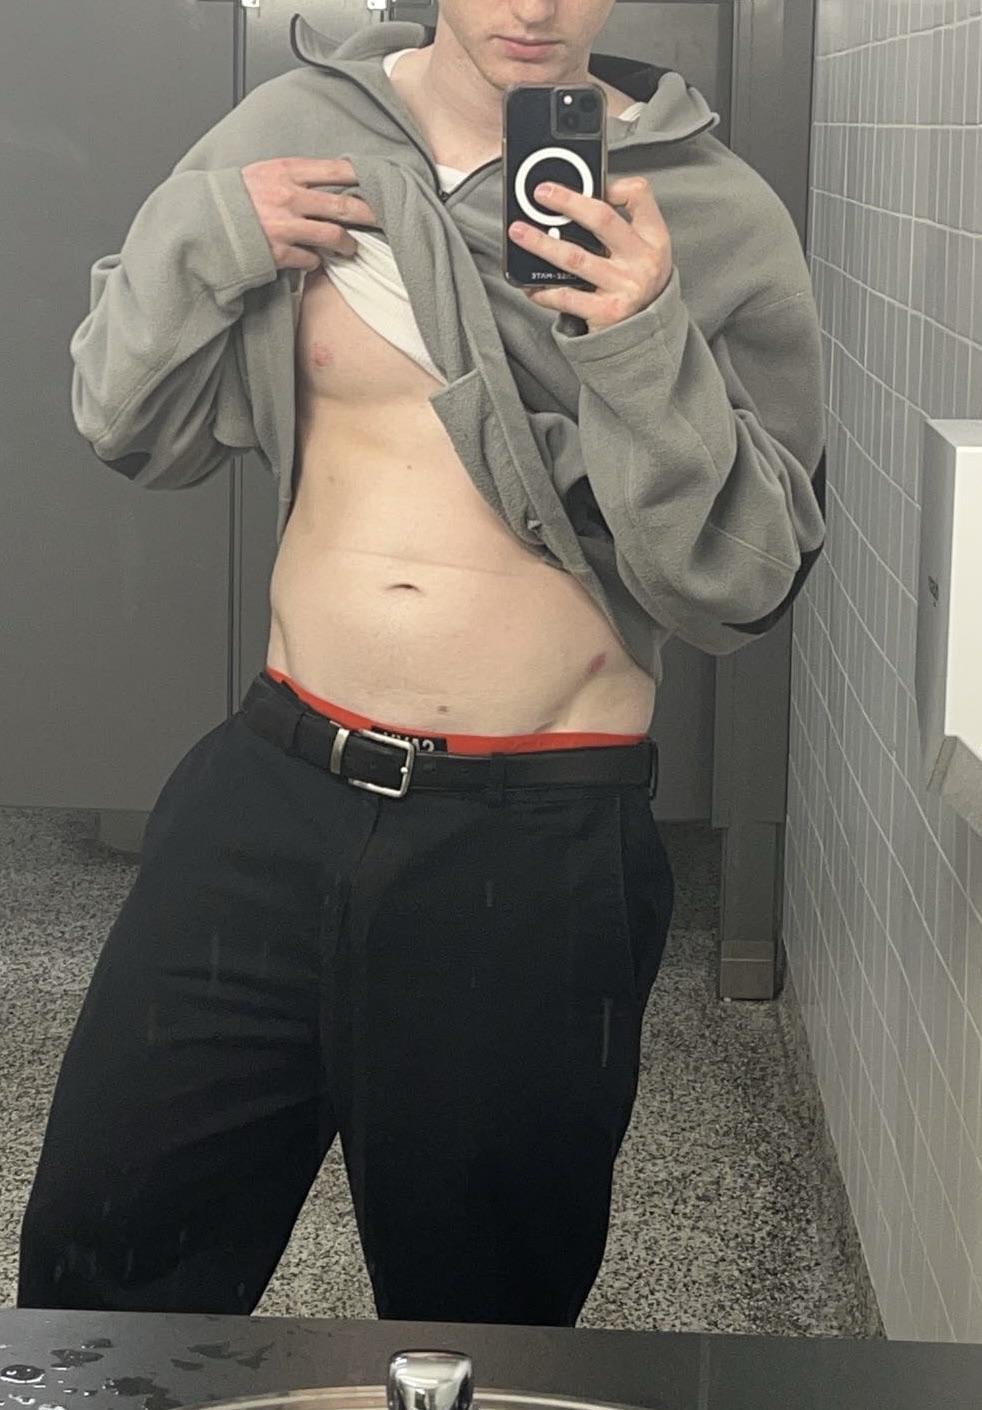 Who wants to nut in my belly button